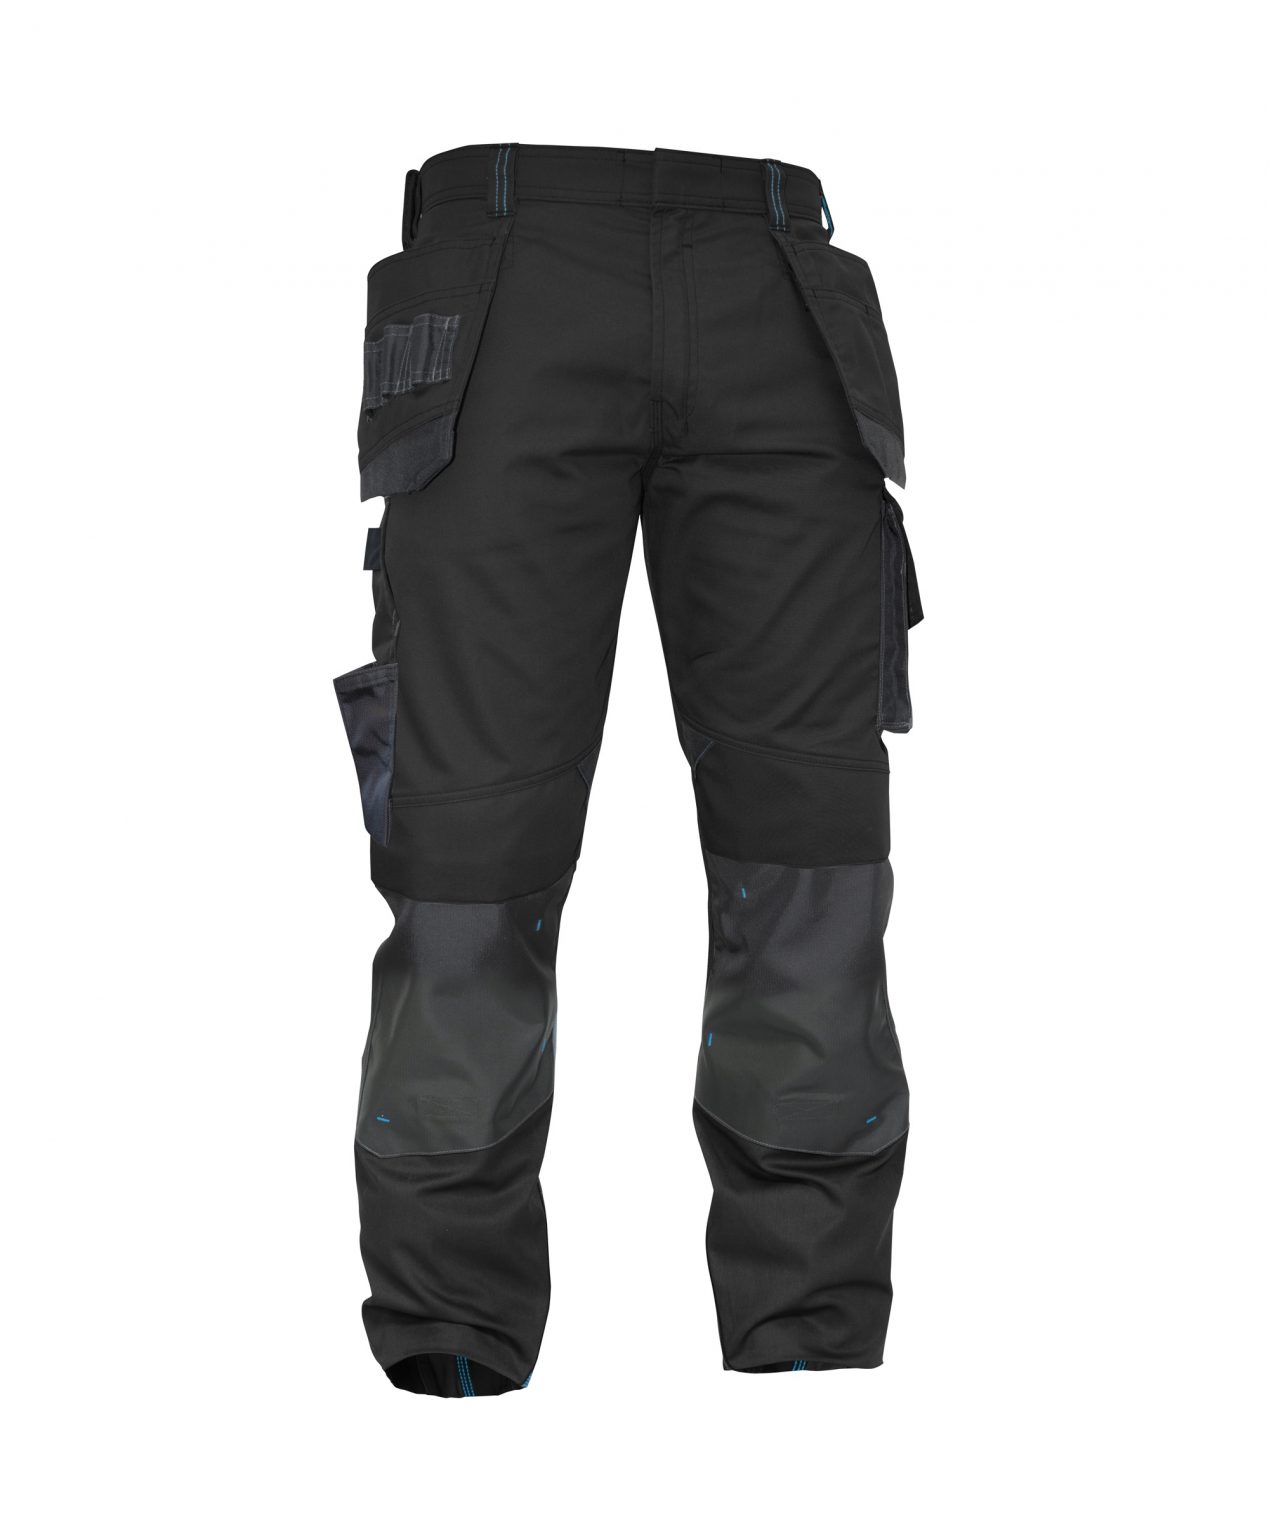 magnetic trousers with holster pockets and knee pockets black anthracite grey front